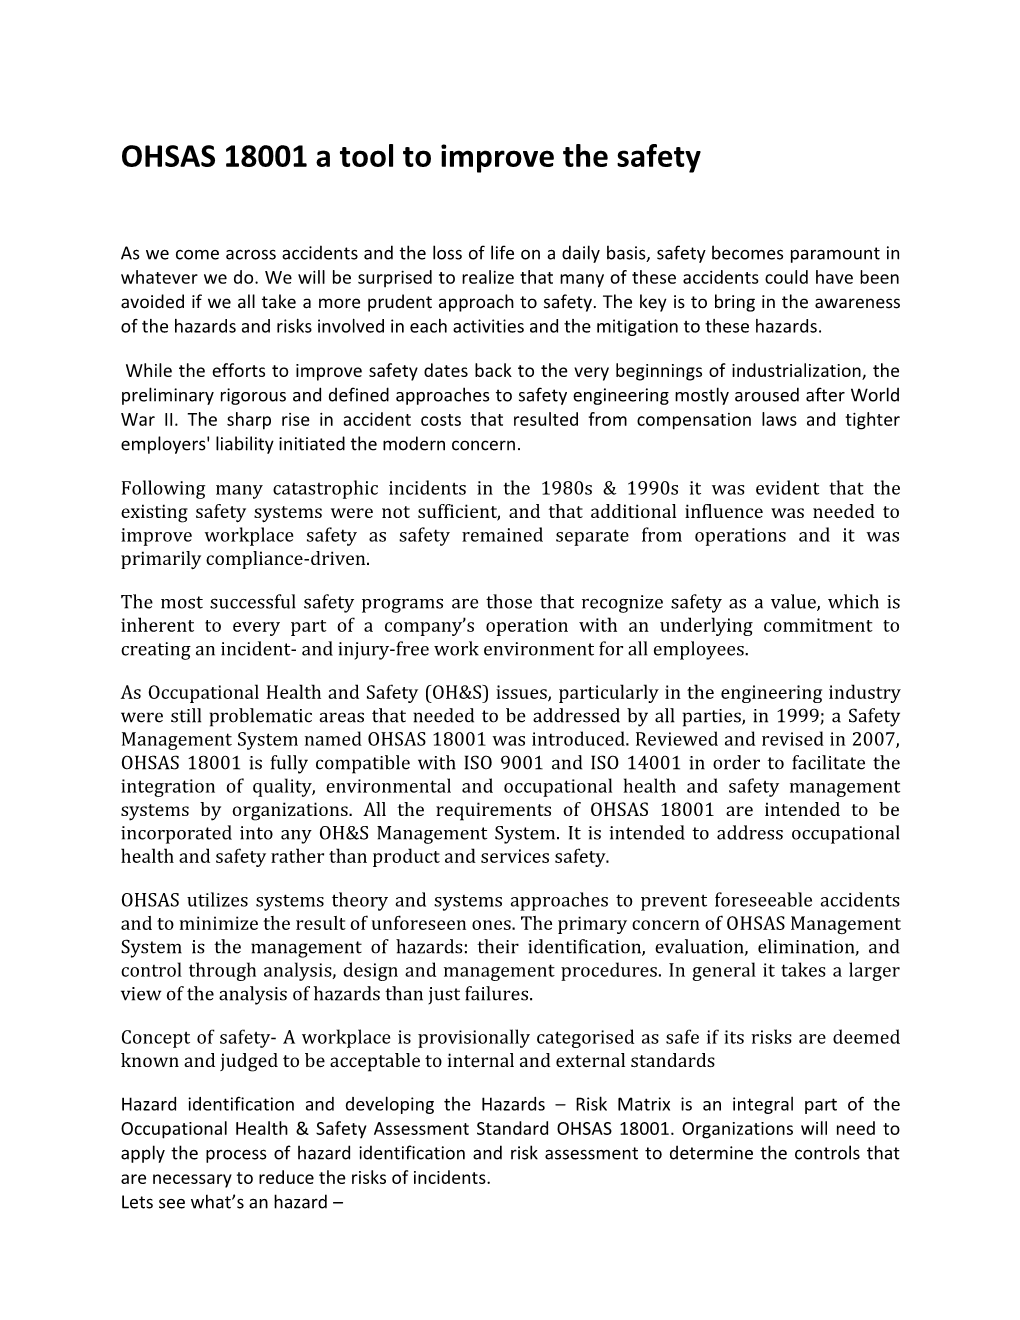 OHSAS 18001 a Tool to Improve the Safety